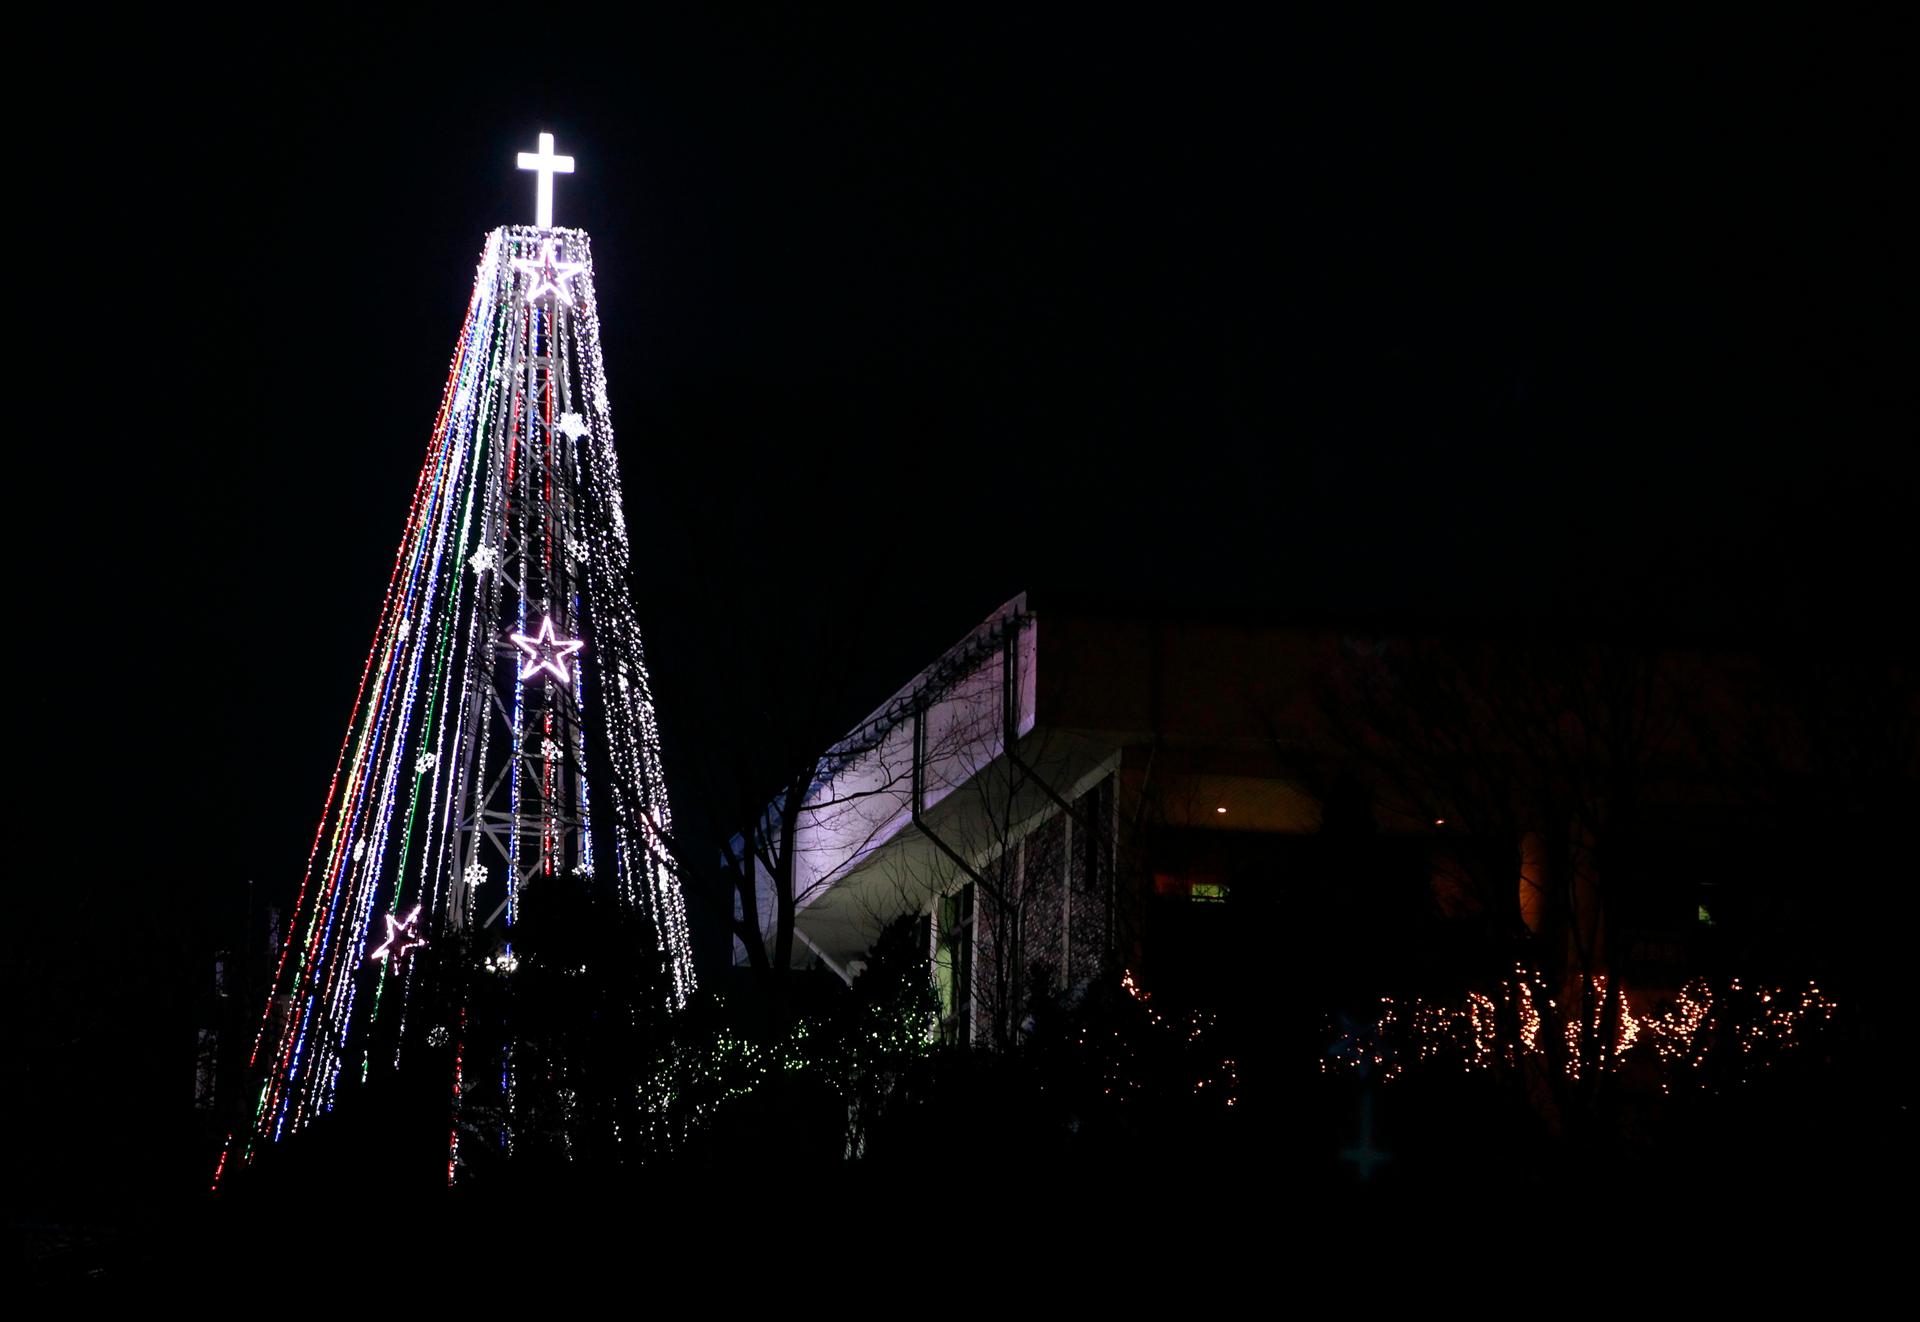 A Christmas'tree' just south of the demilitarised zone (DMZ) separating the two Koreas in Gimpo, west of Seoul as seen on December 21, 2010